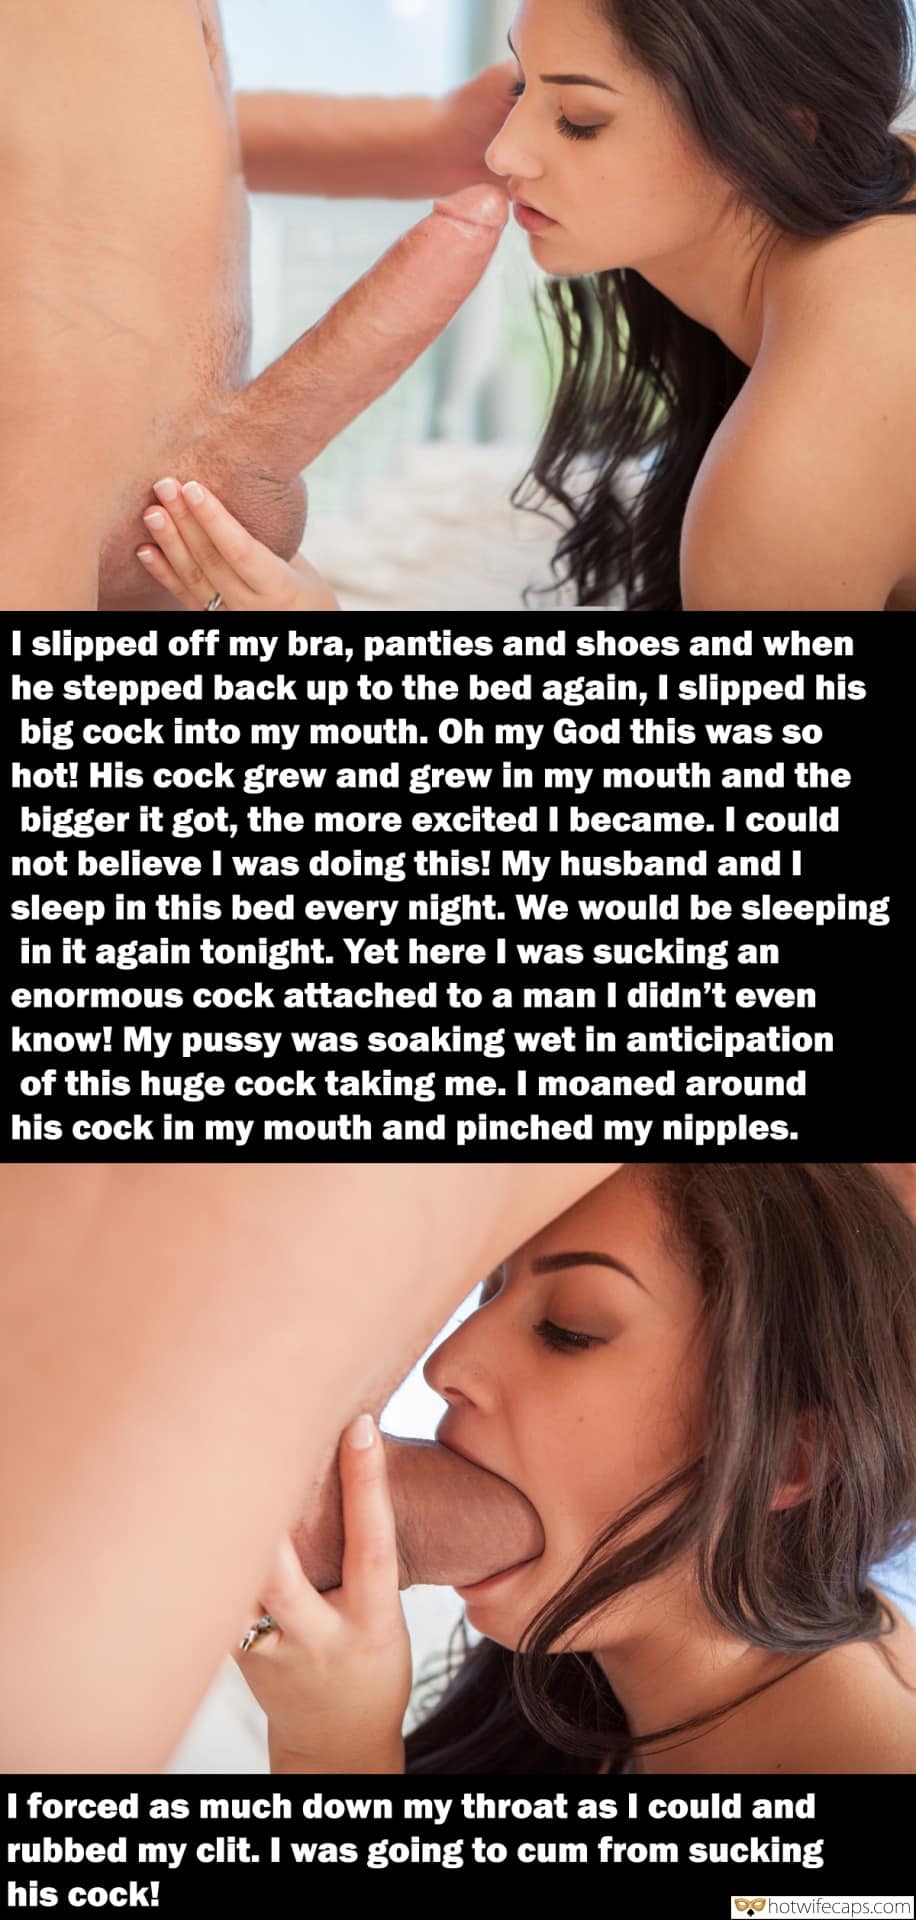 Story about sucking dick in church